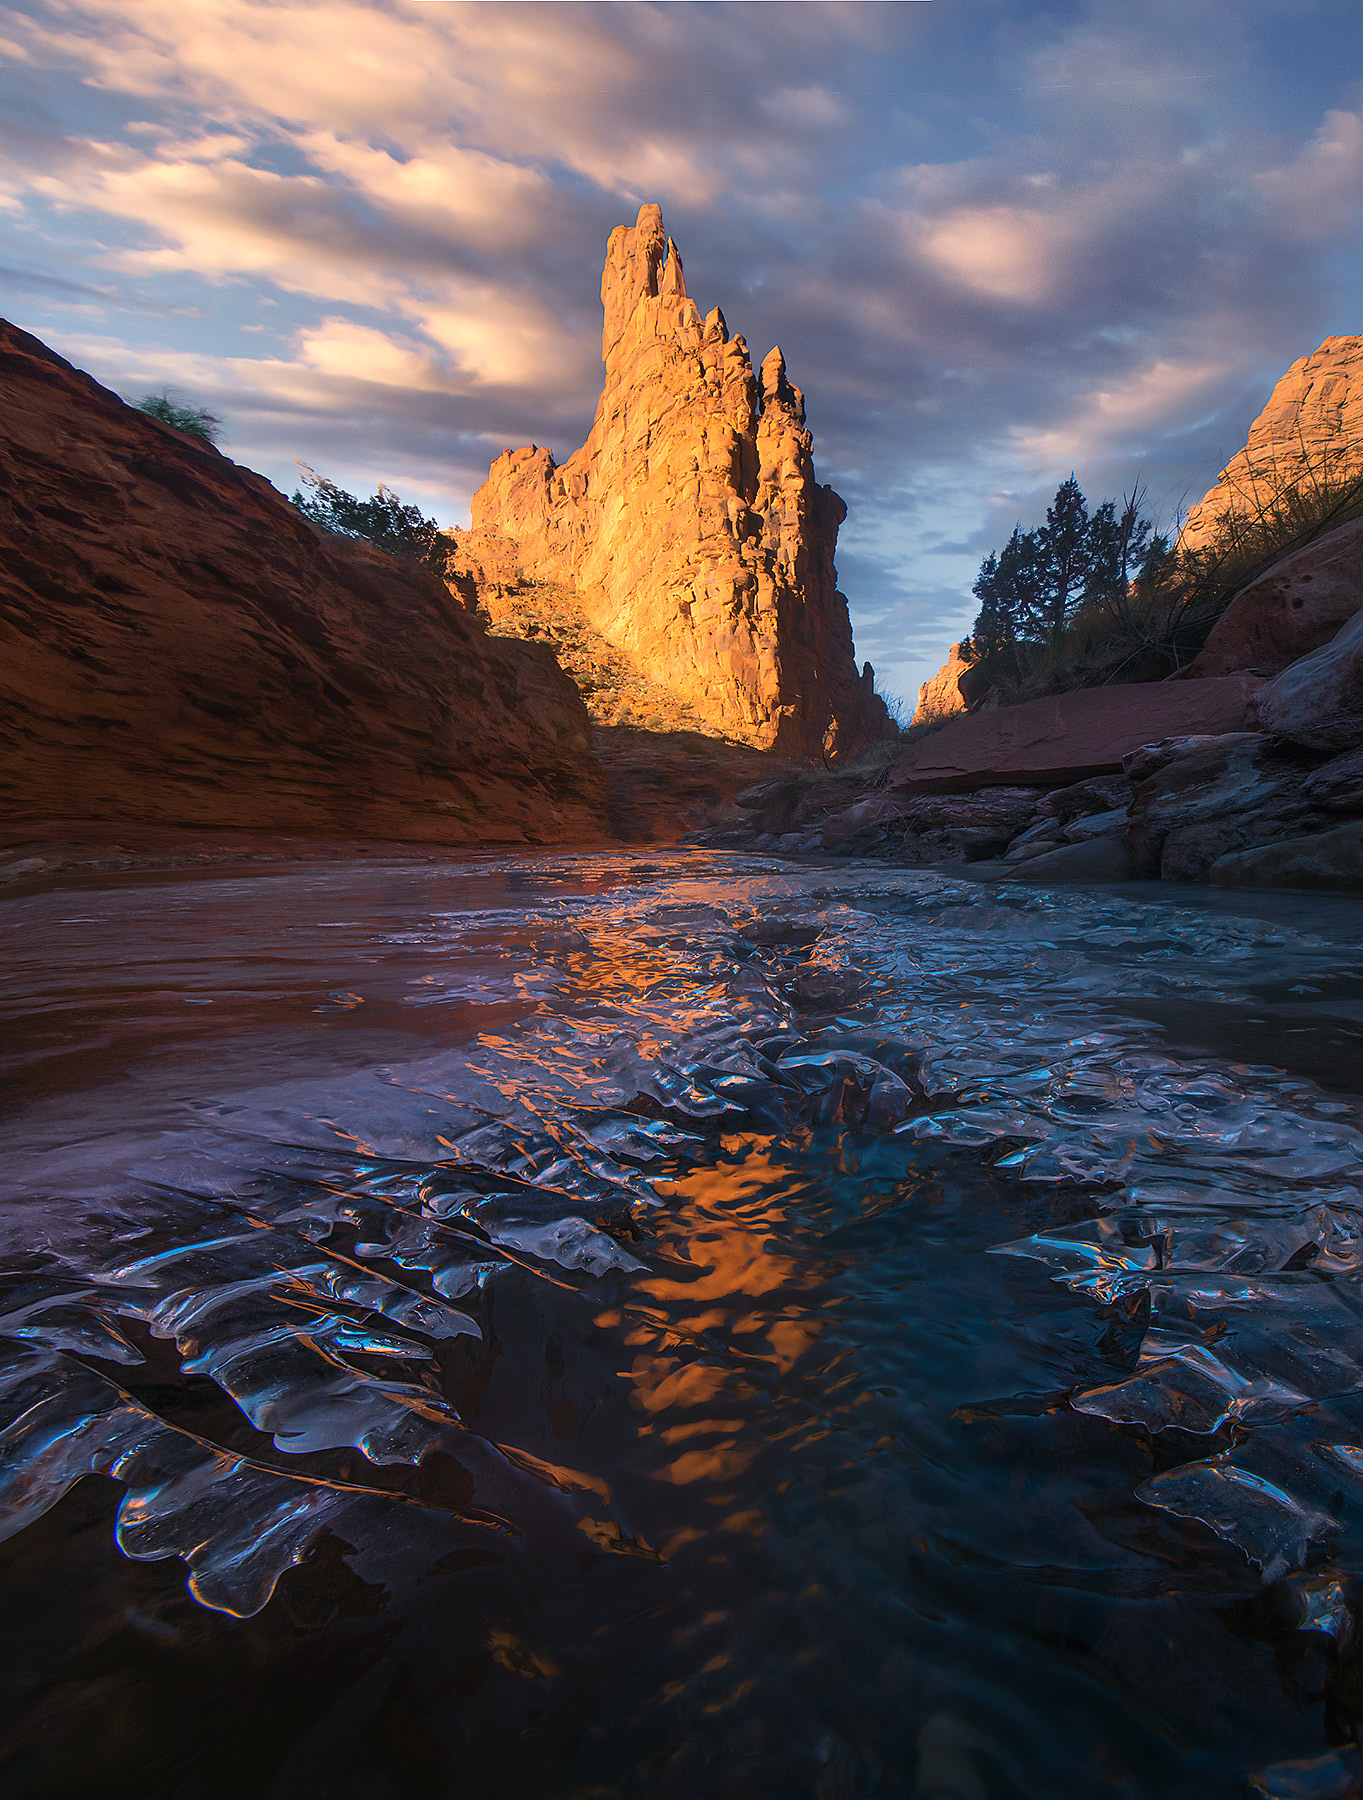 Red rock towers catch the sunrise light reflected in an icy stream